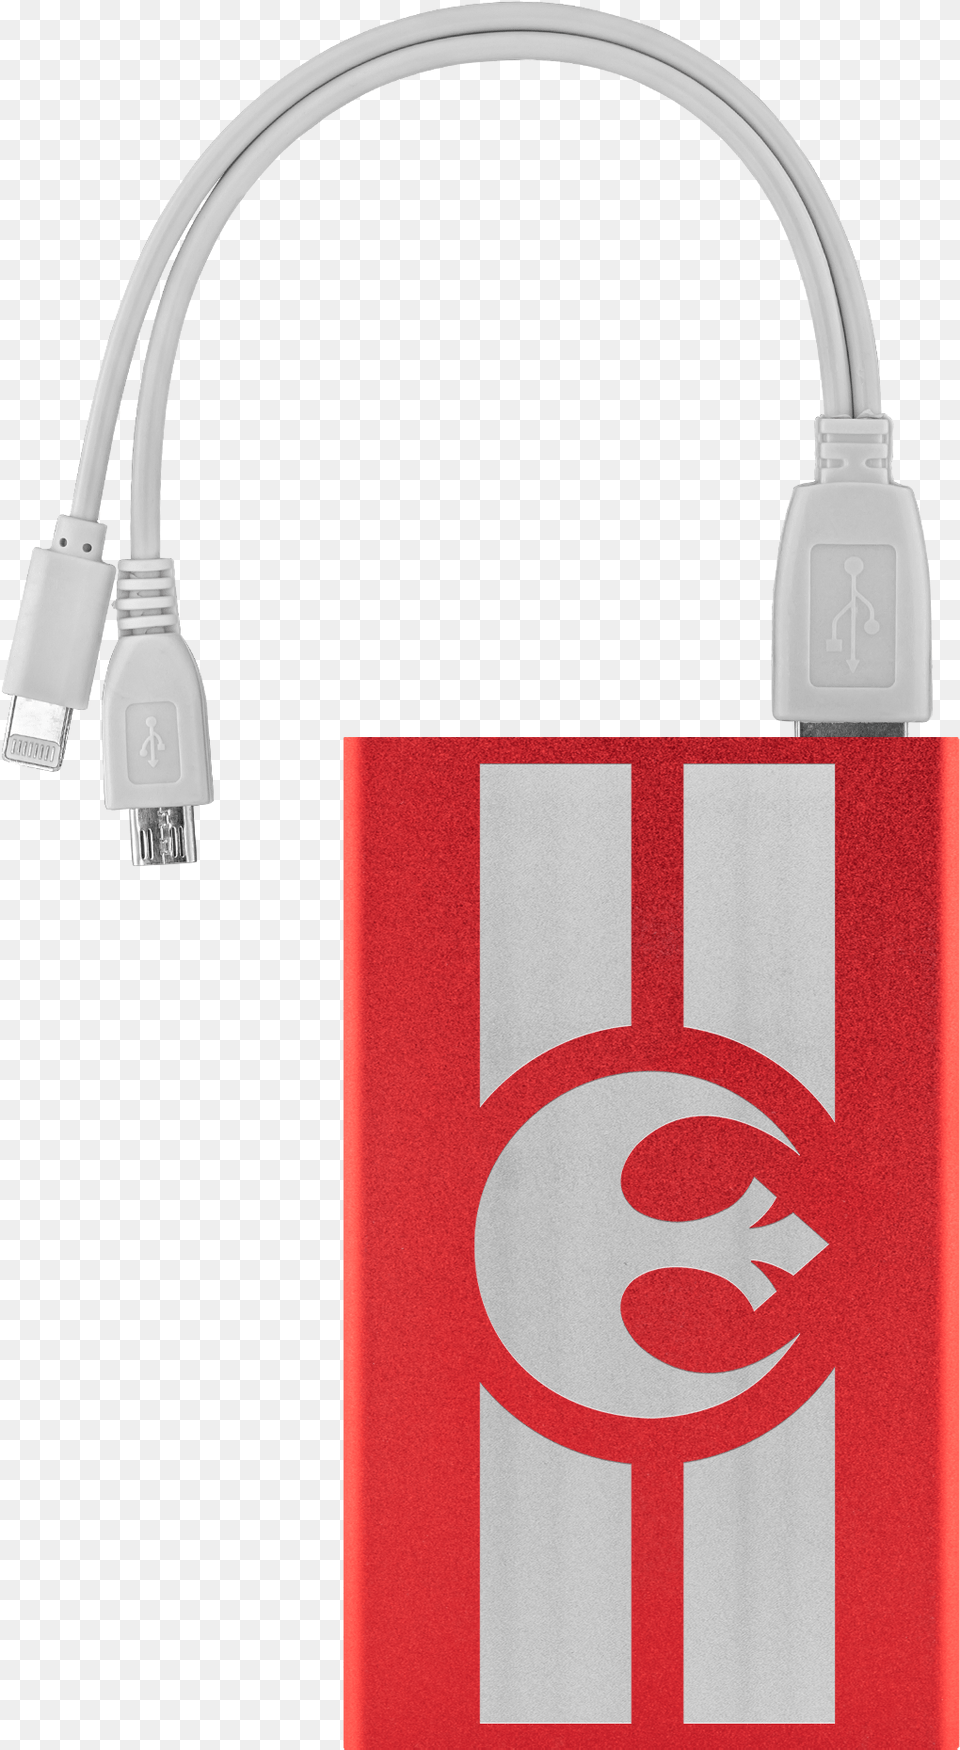 Rebel Alliance Etched Portable Power Bank Battery Charger, Computer Hardware, Electronics, Hardware, Adapter Png Image